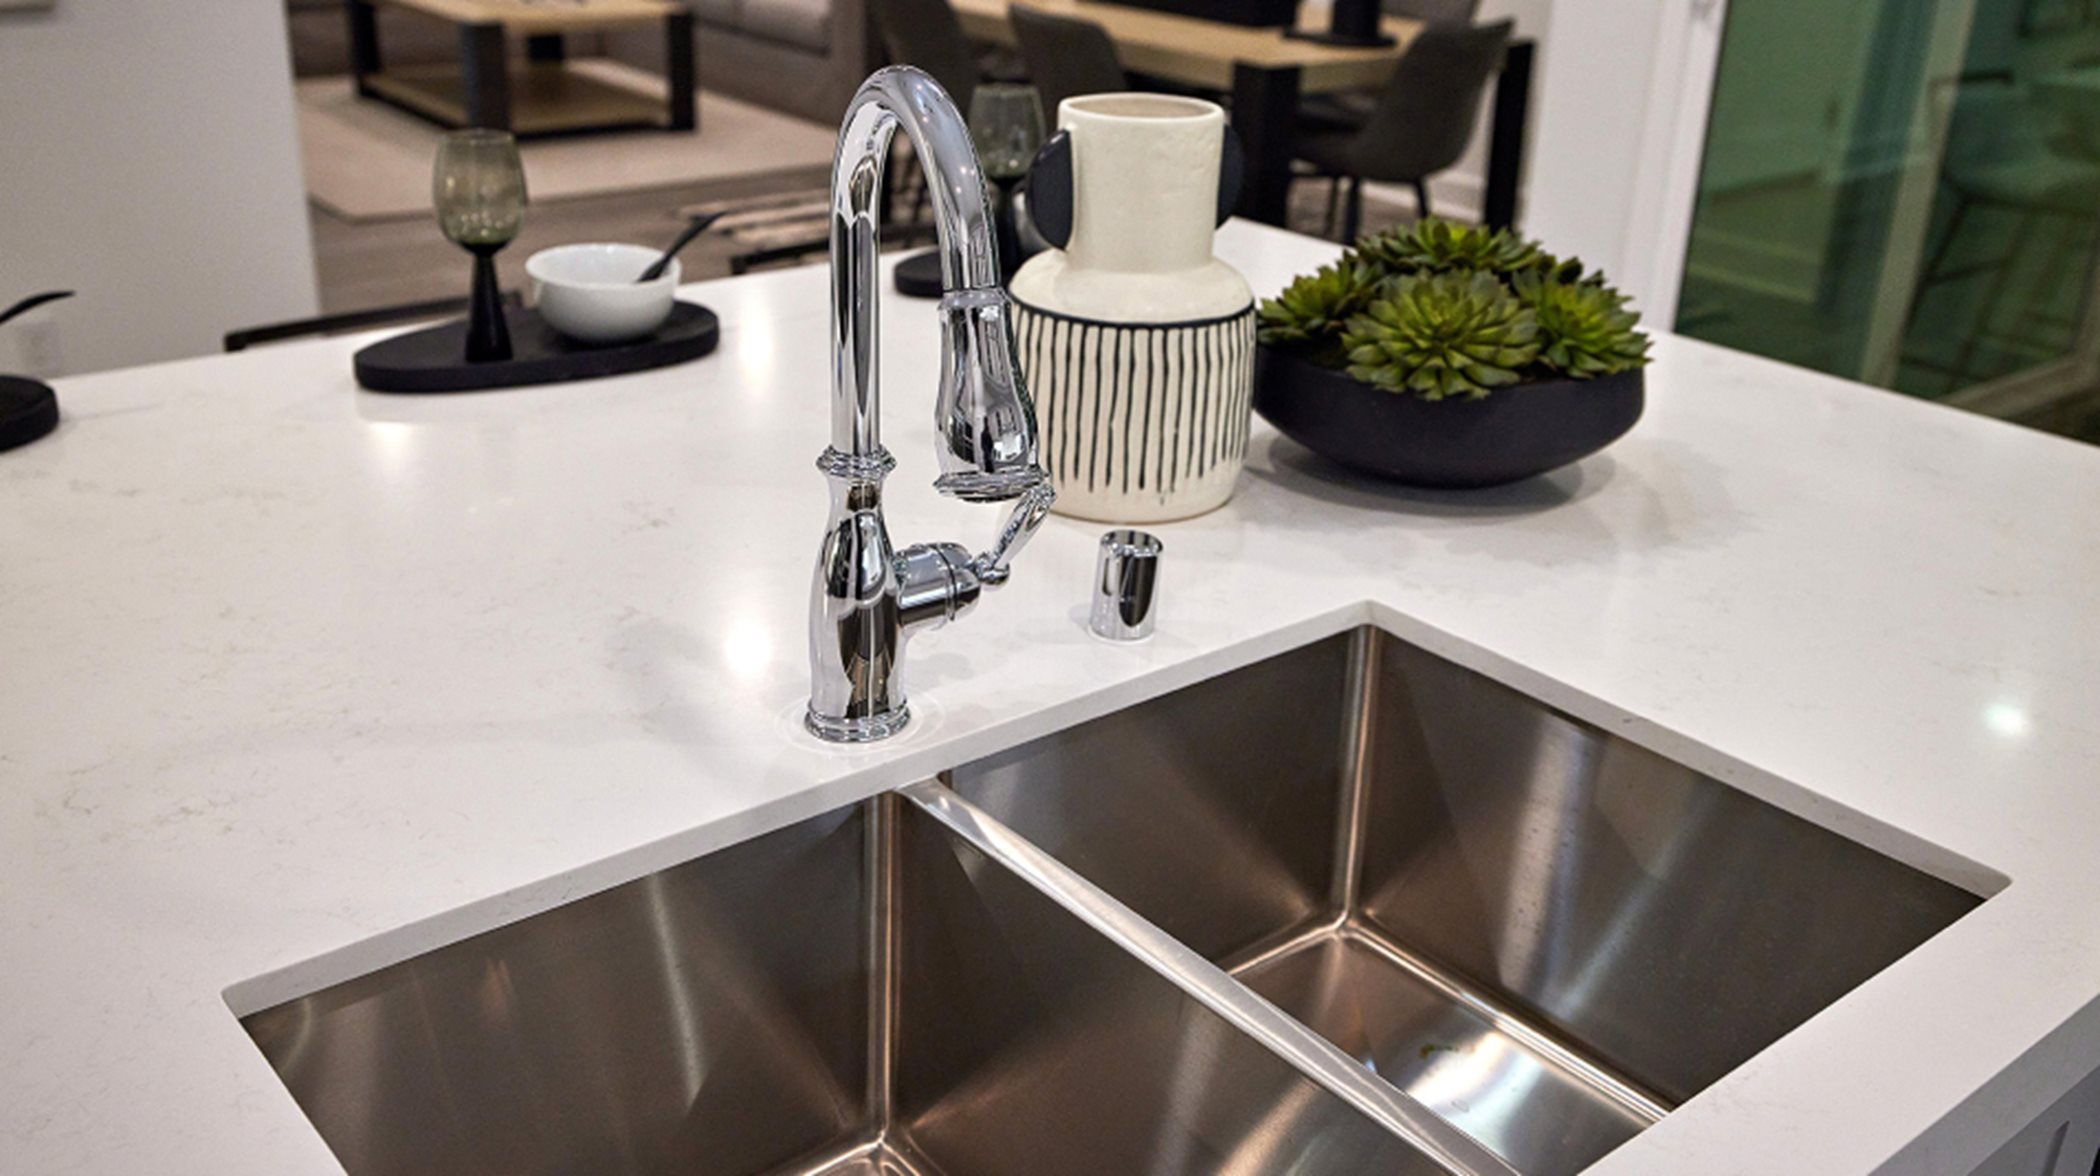 A stainless steel dual-basin sink is complemented by a designer Moen® faucet